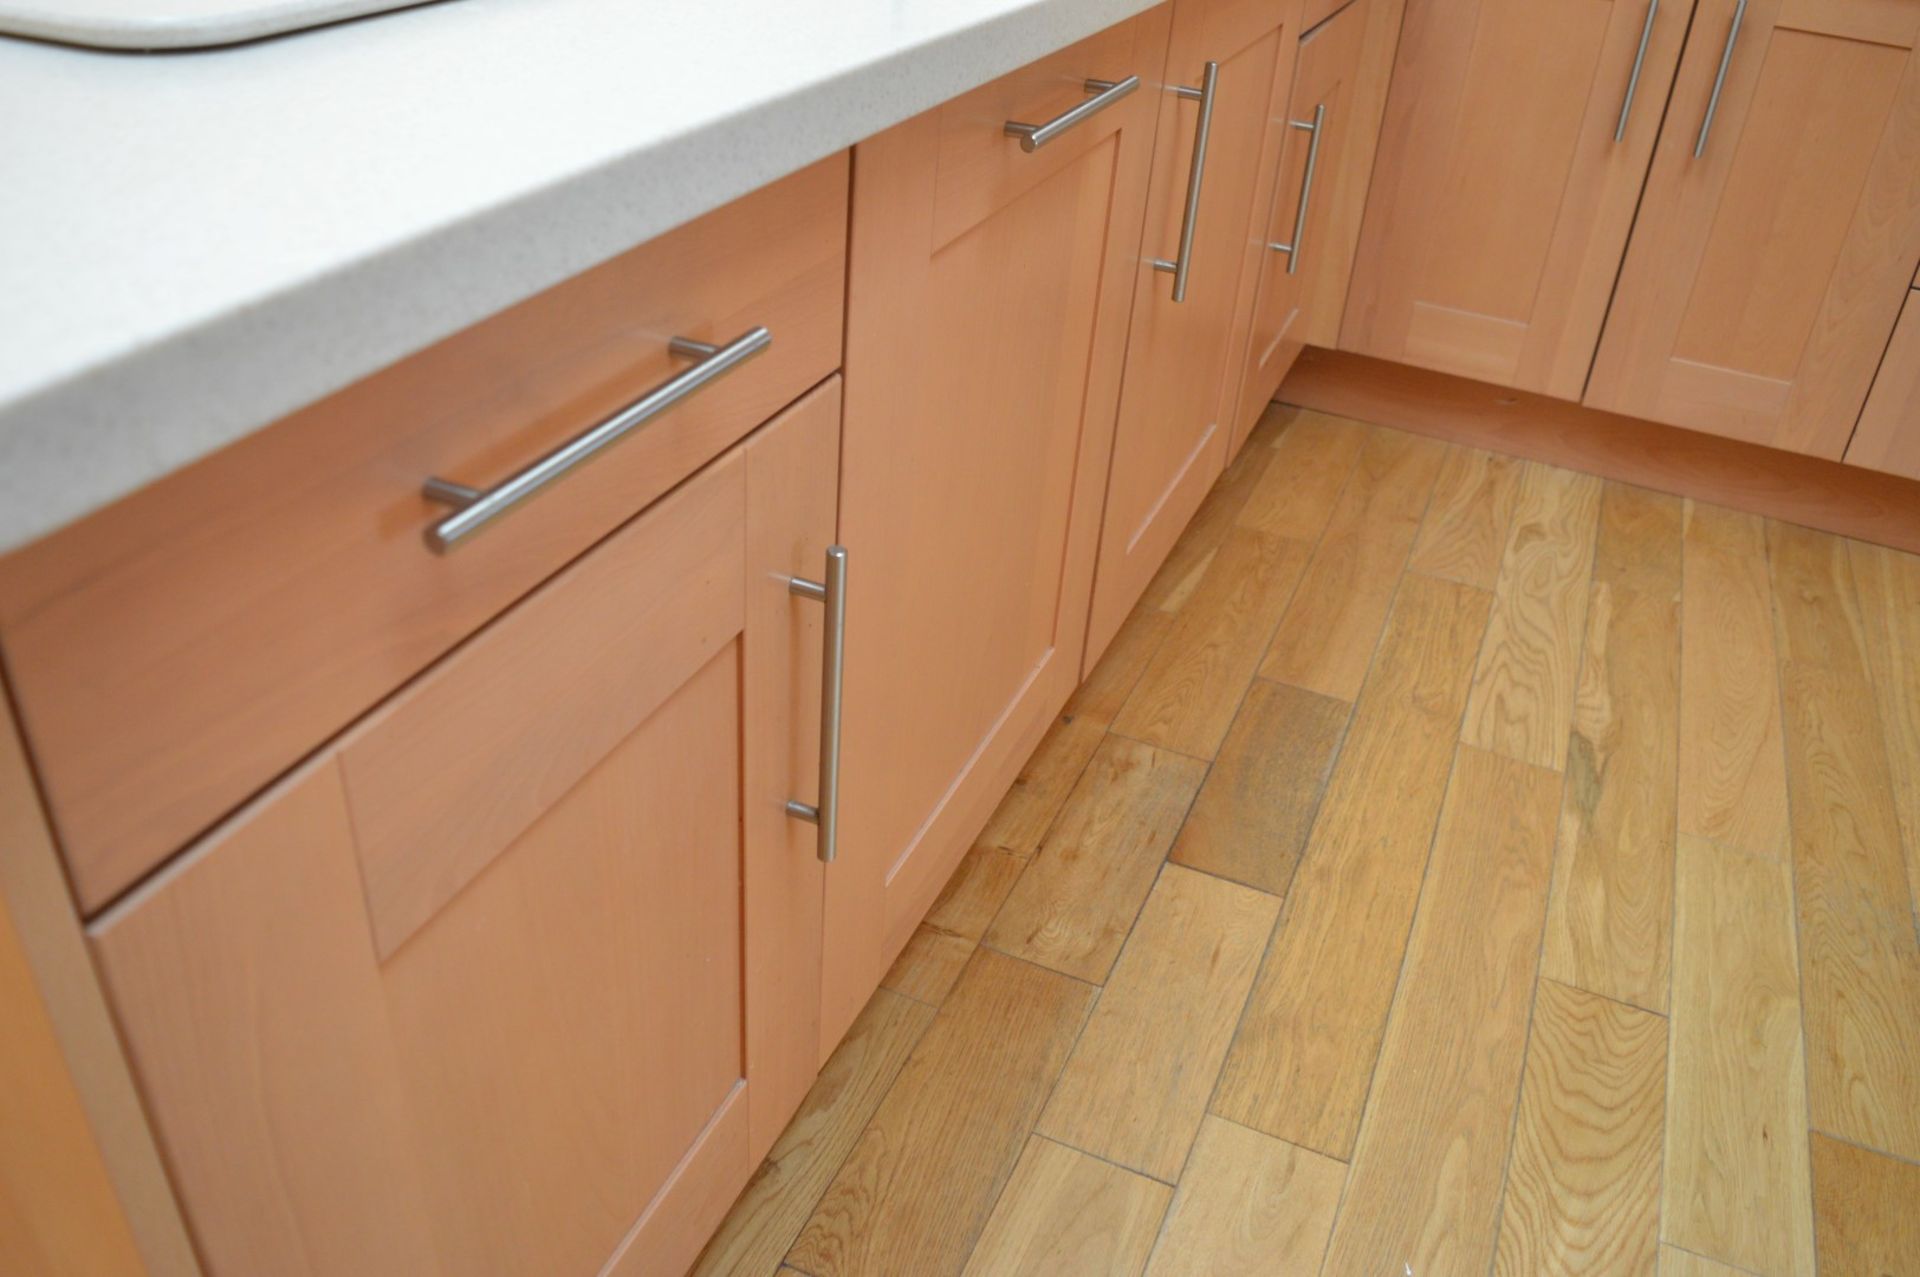 1 x Bespoke Maelstrom Solid Wood Fitted Kitchen With Corian Tops - In Excellent Condition - Neff - Image 63 of 65